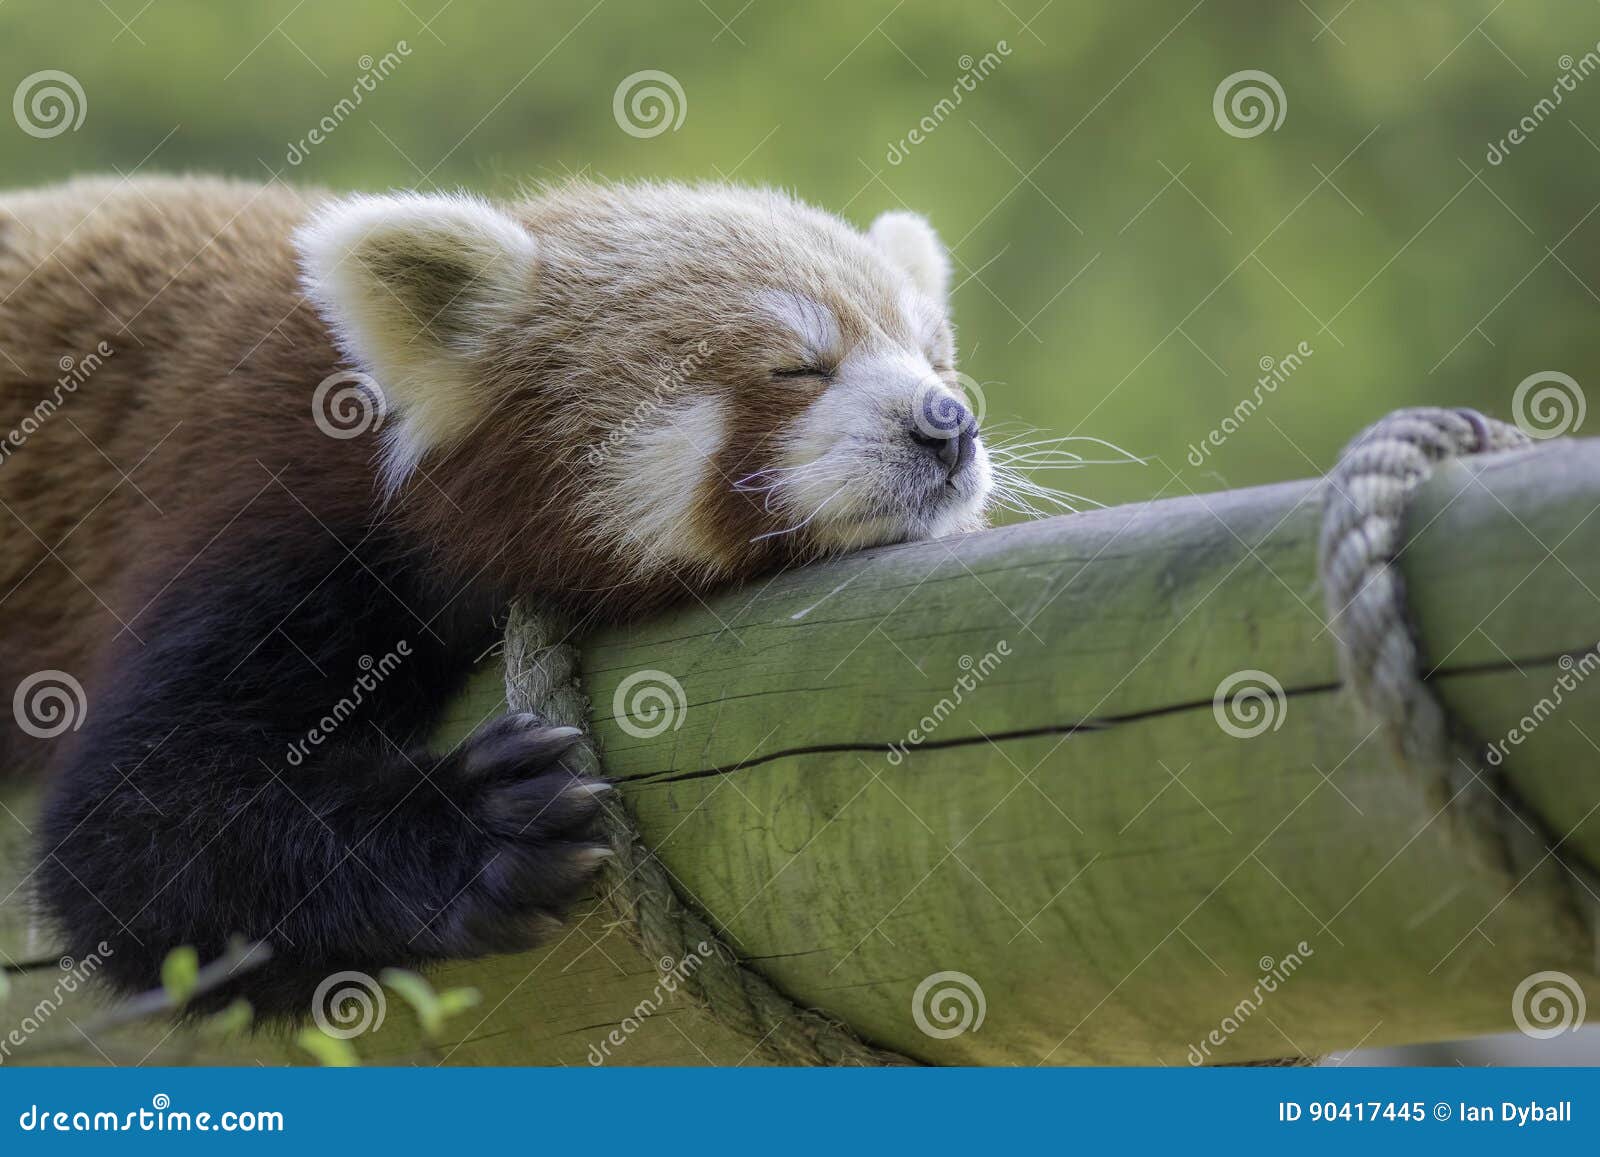 close up of a red panda sleeping. exhausted cute animal